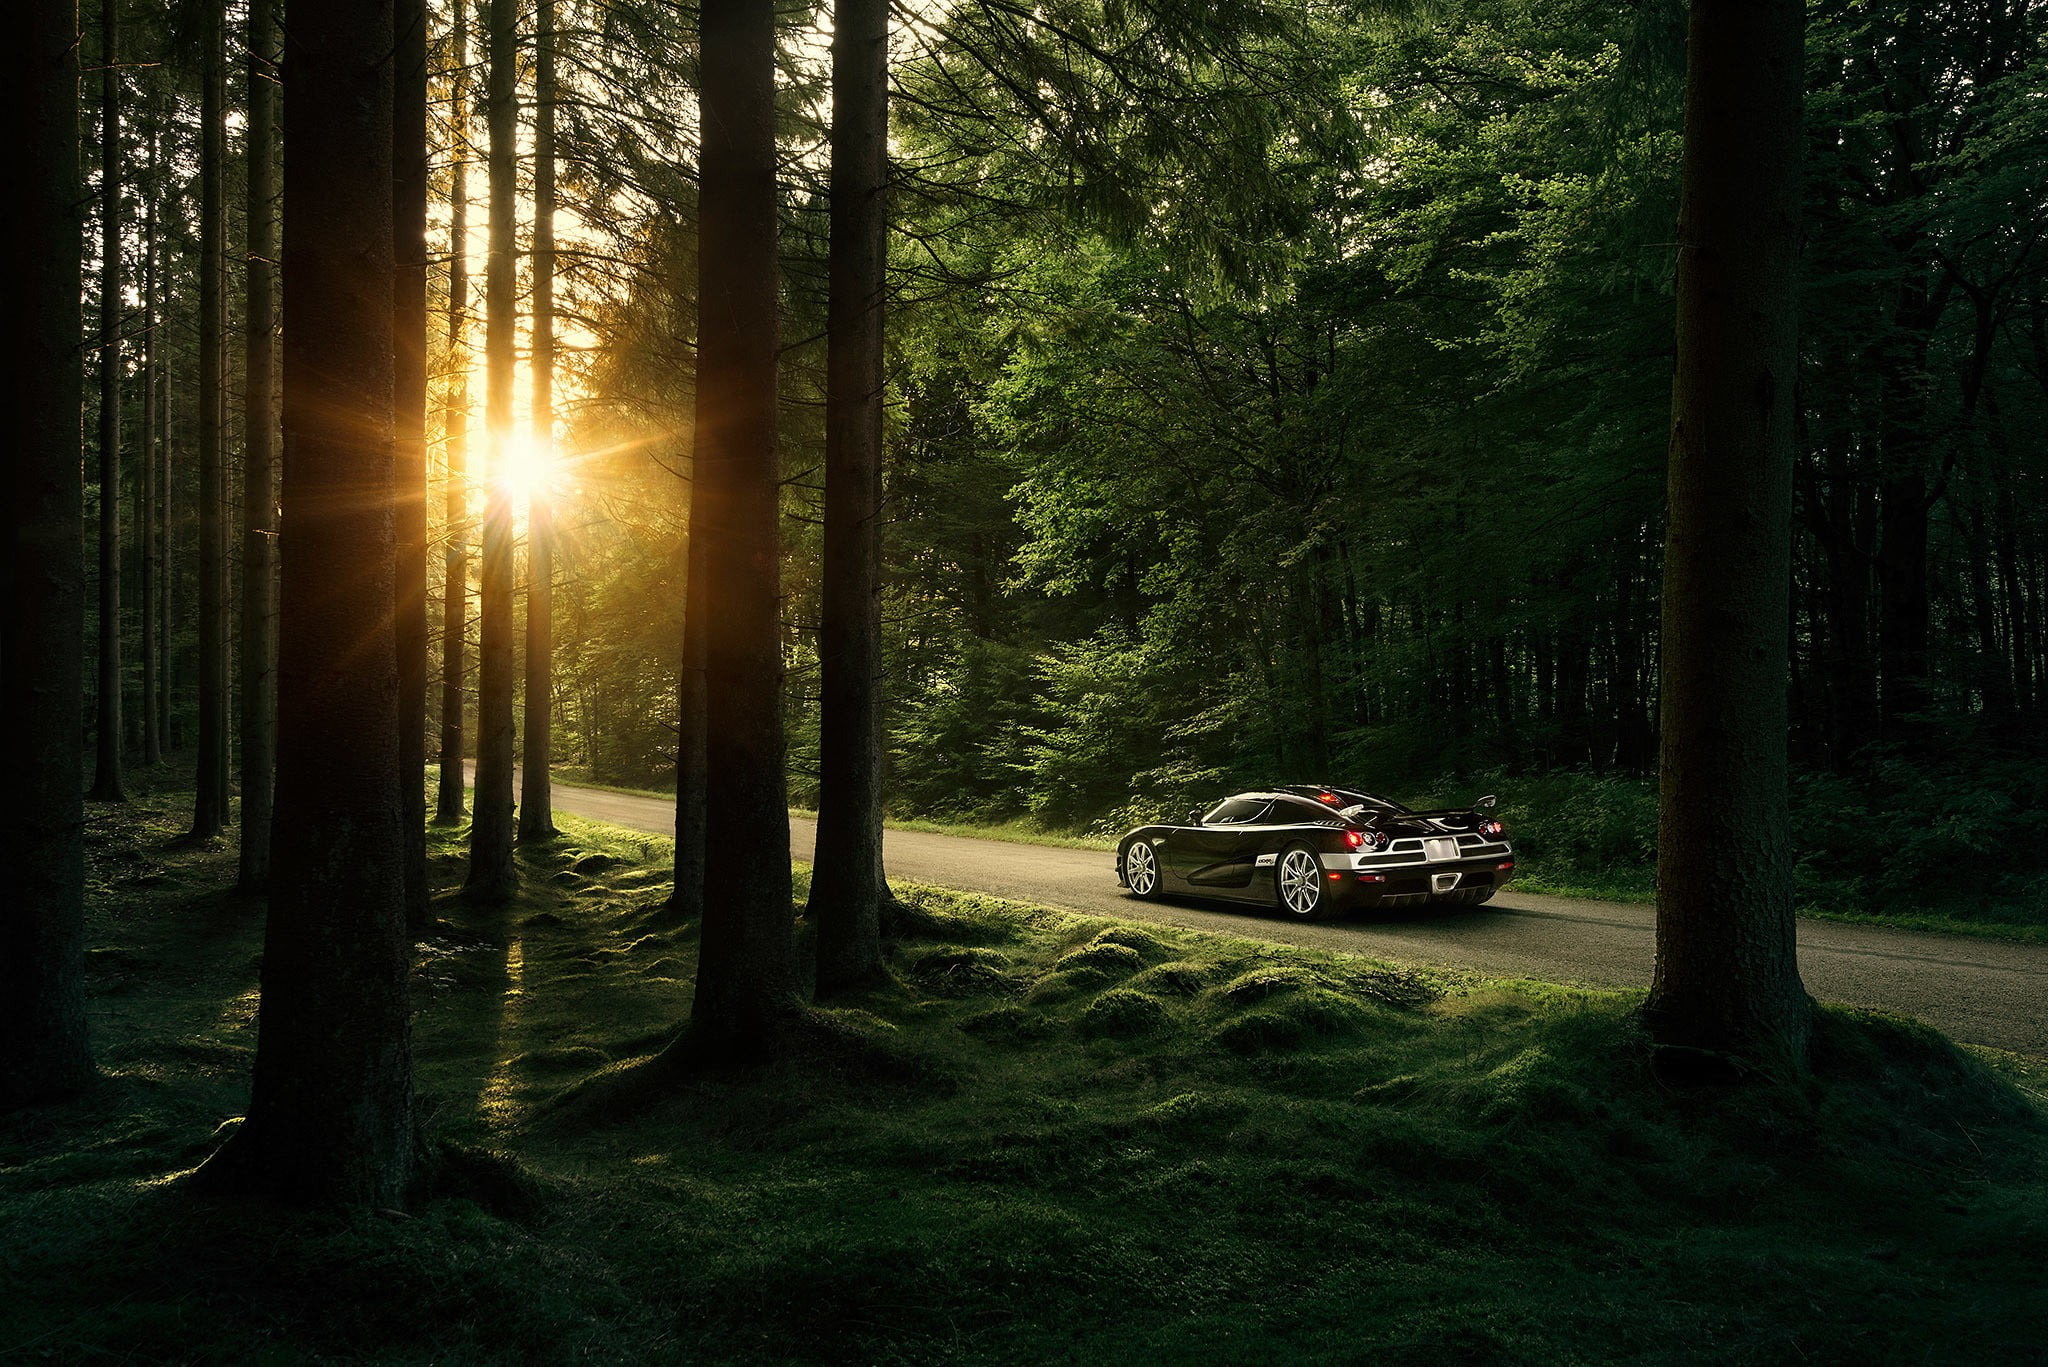 black coupe, nature, trees, forest, sunlight, Koenigsegg, sports car